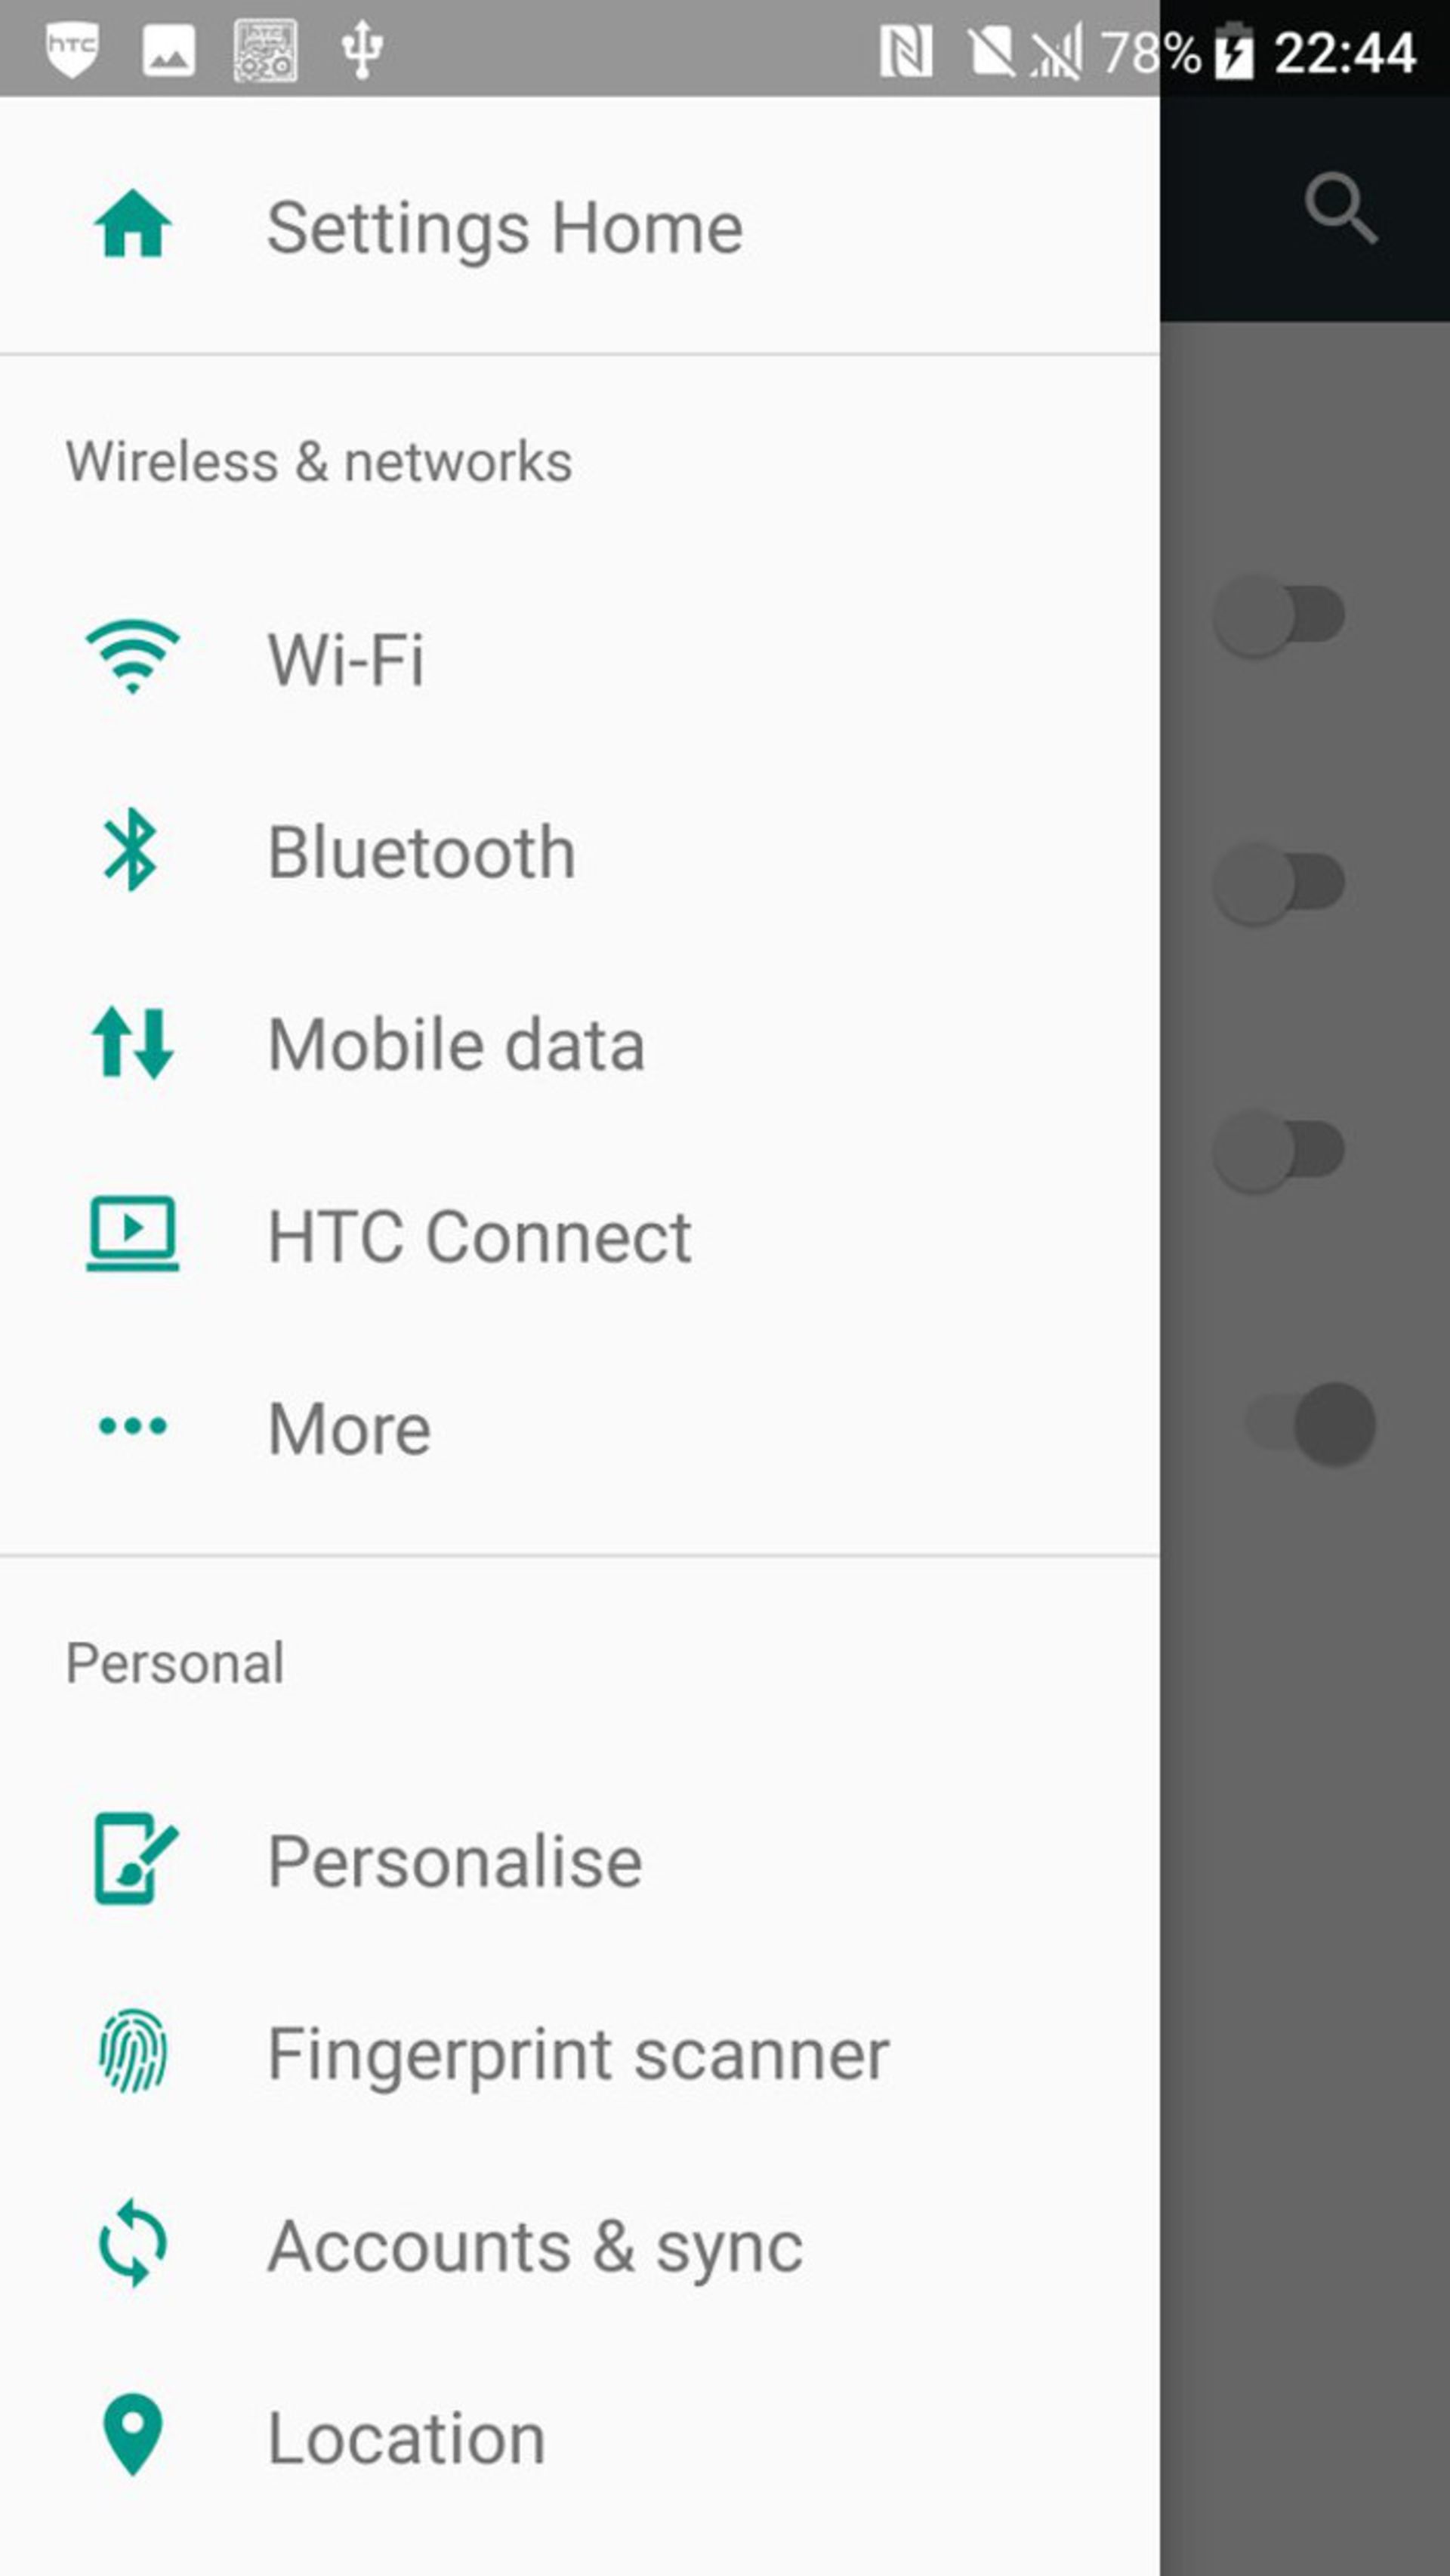 Leaked screenshots show Android 7.0 Nougat on the HTC 10